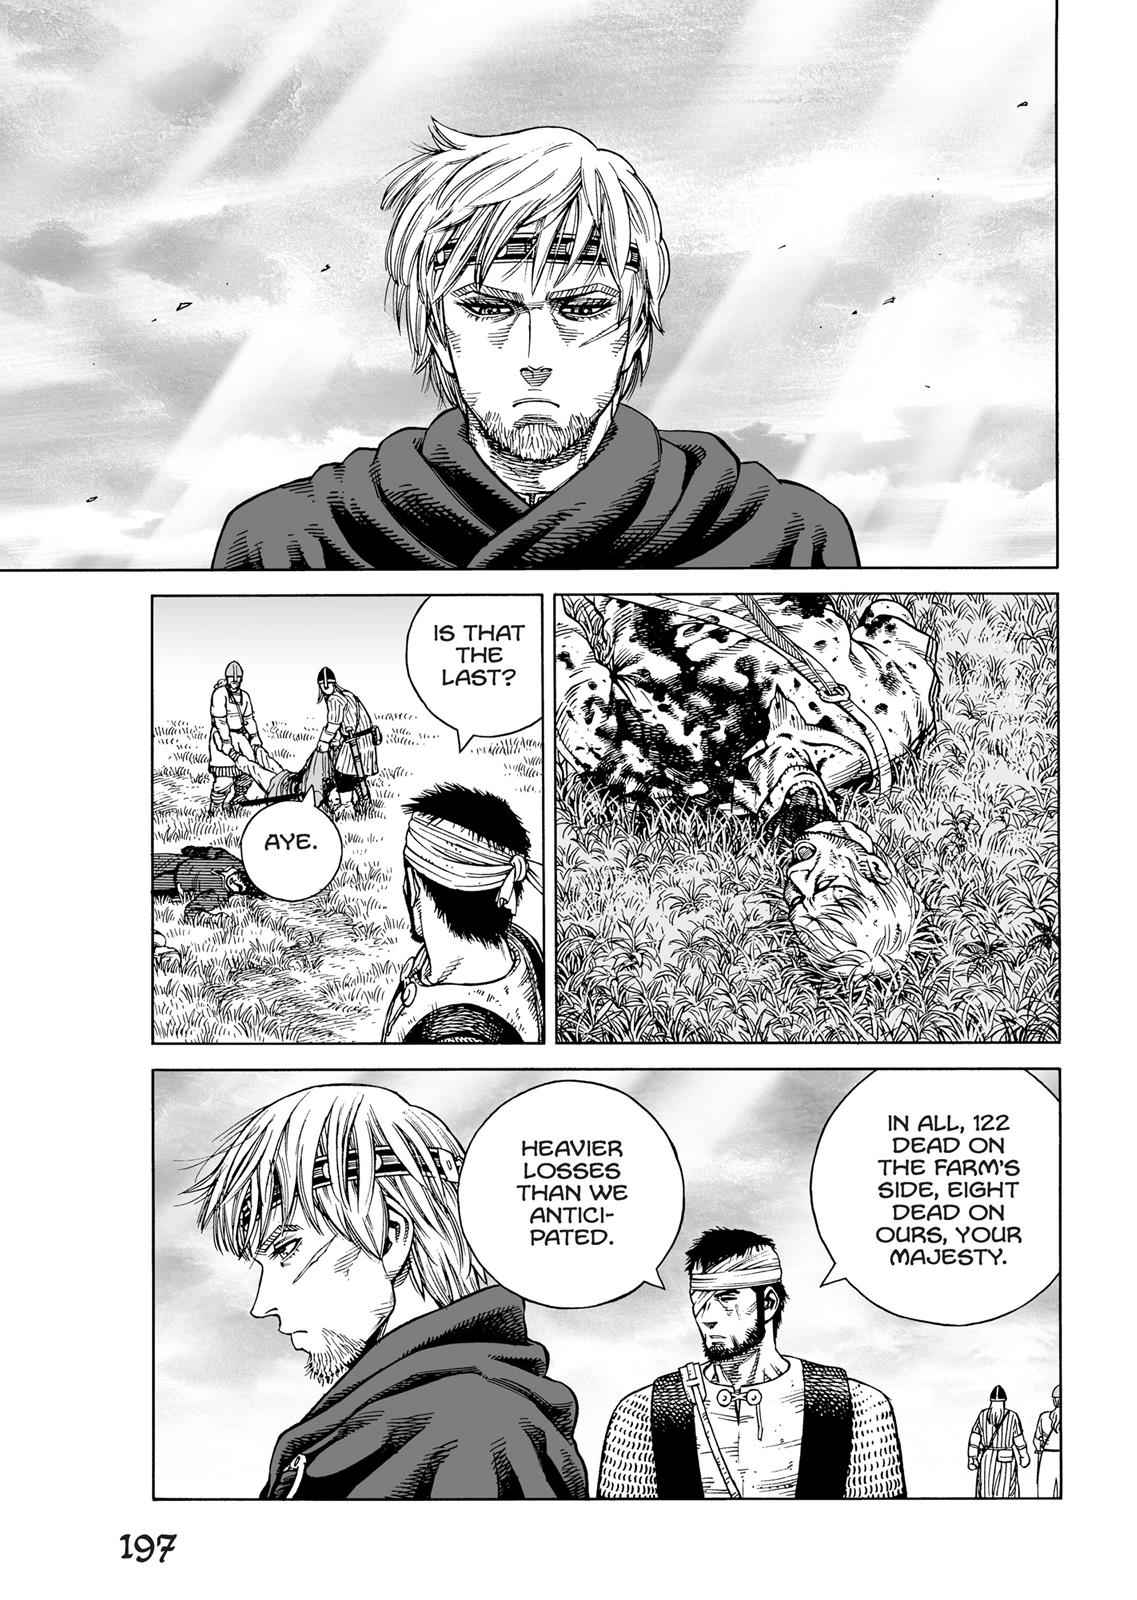 Read Manga Online Vinland Saga Manga Chapter 185 Release Date And All The Latest Updates